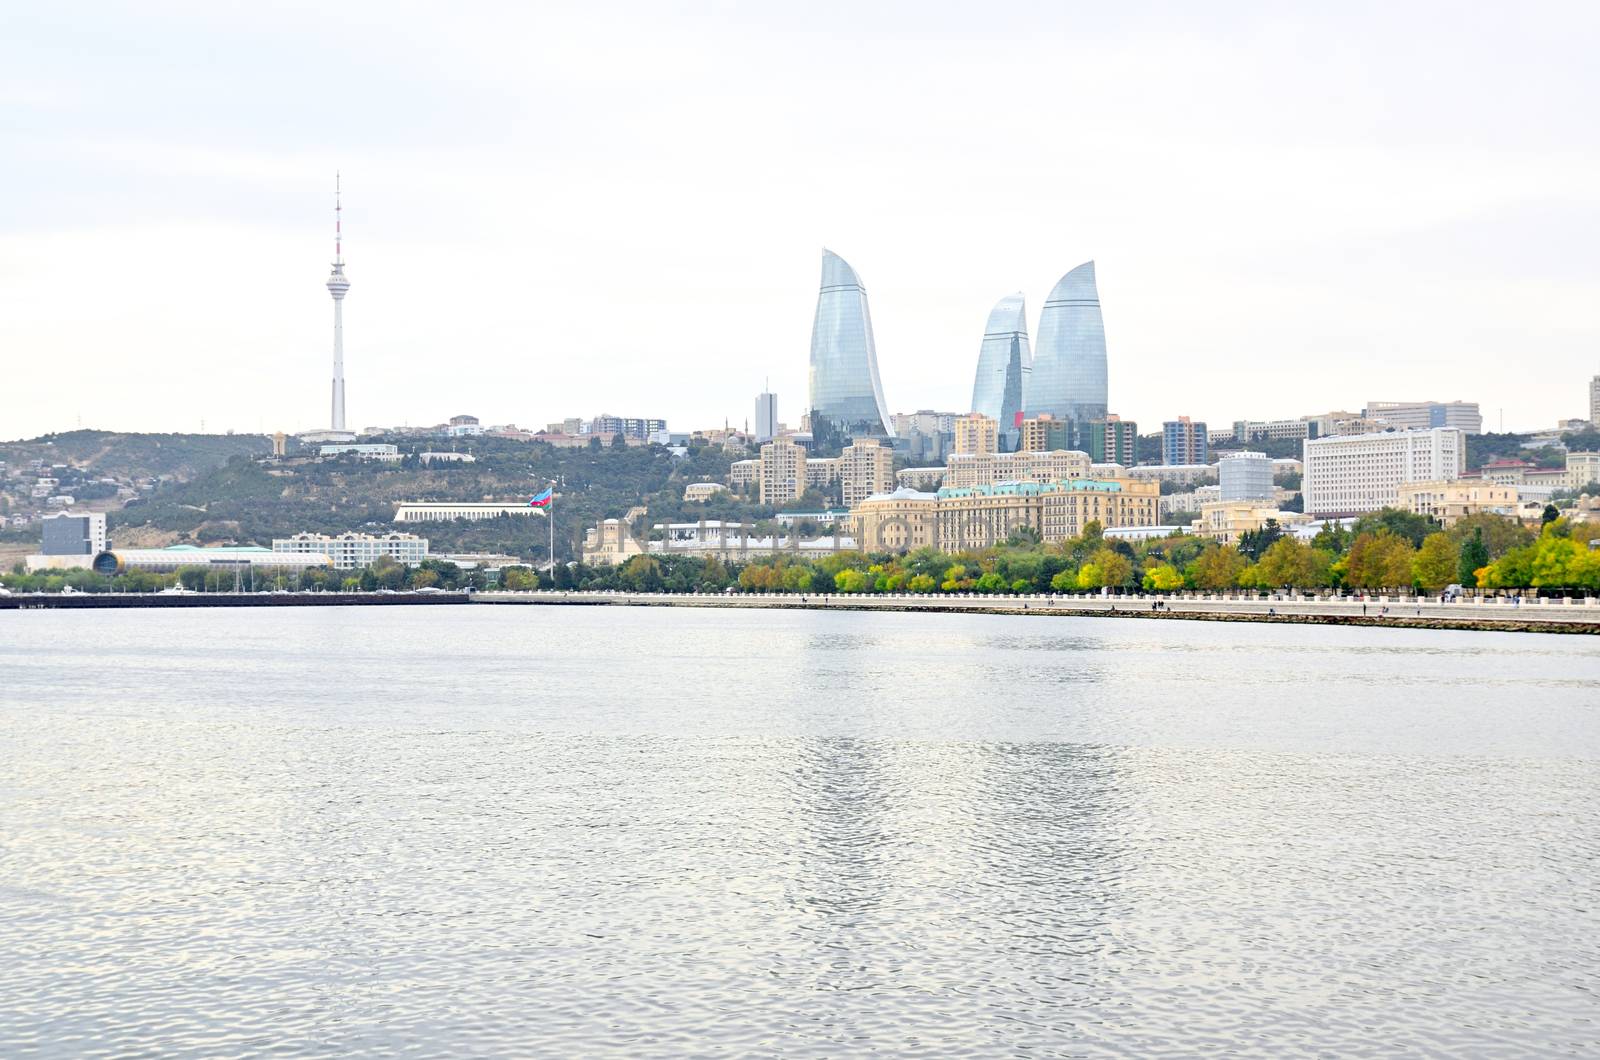 Baku.Types of boulevards on the shore of the Caspian Sea. by moviephoto